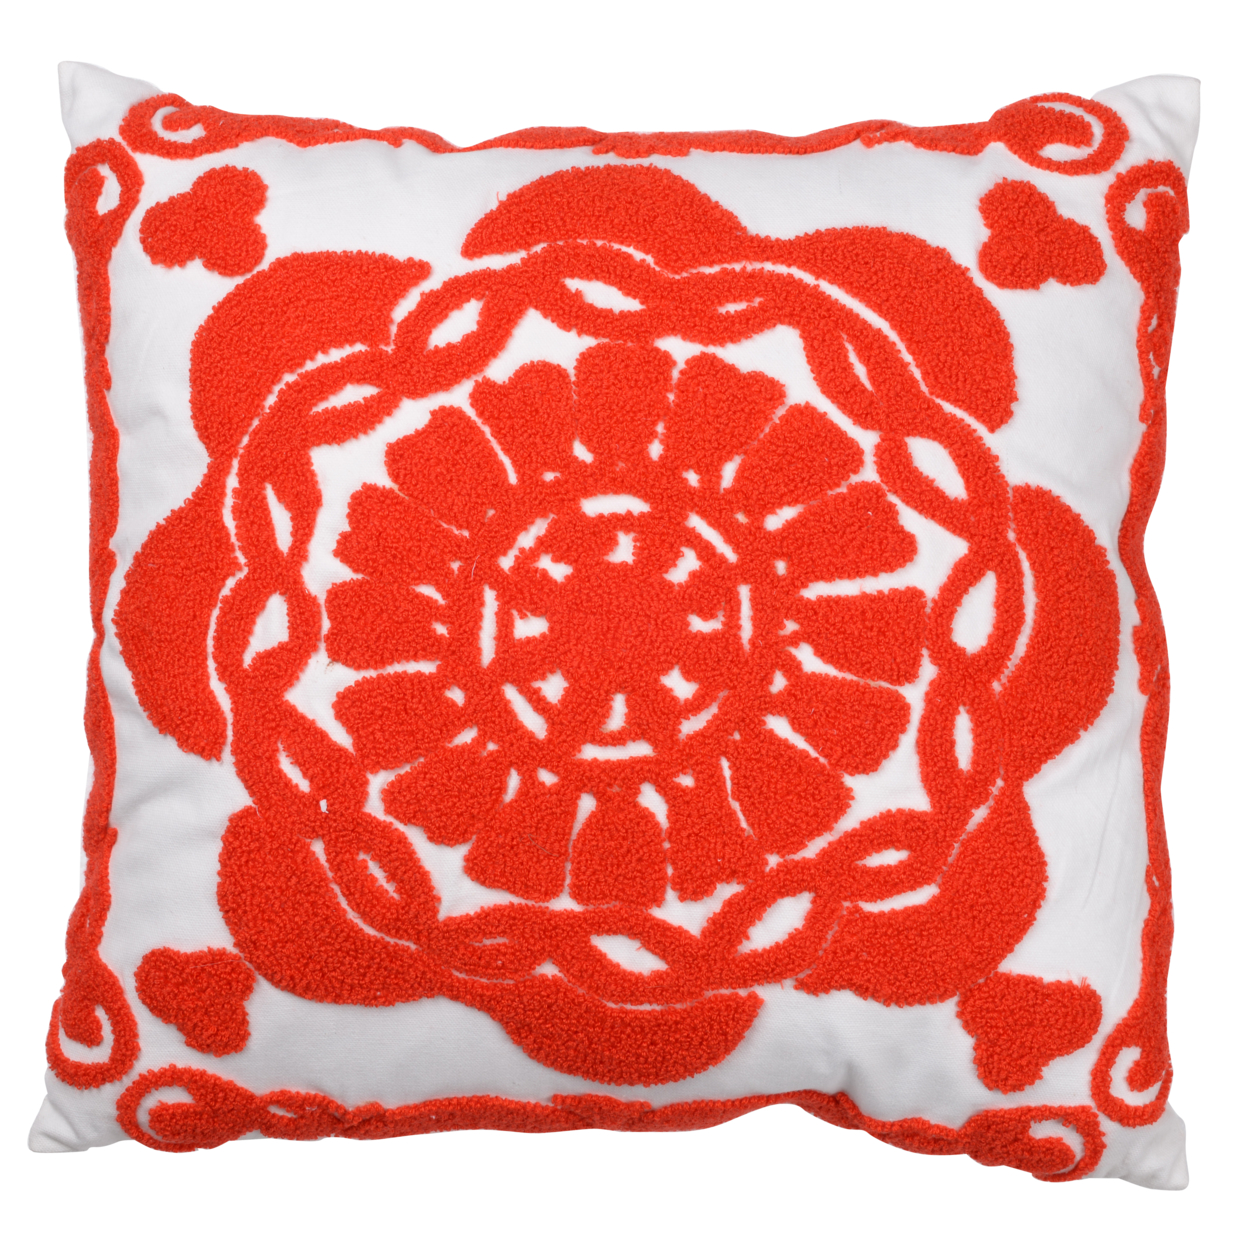 18 X 18 Inch Cotton Pillow With Crest Embroidery, Set Of 2, White And Red- Saltoro Sherpi